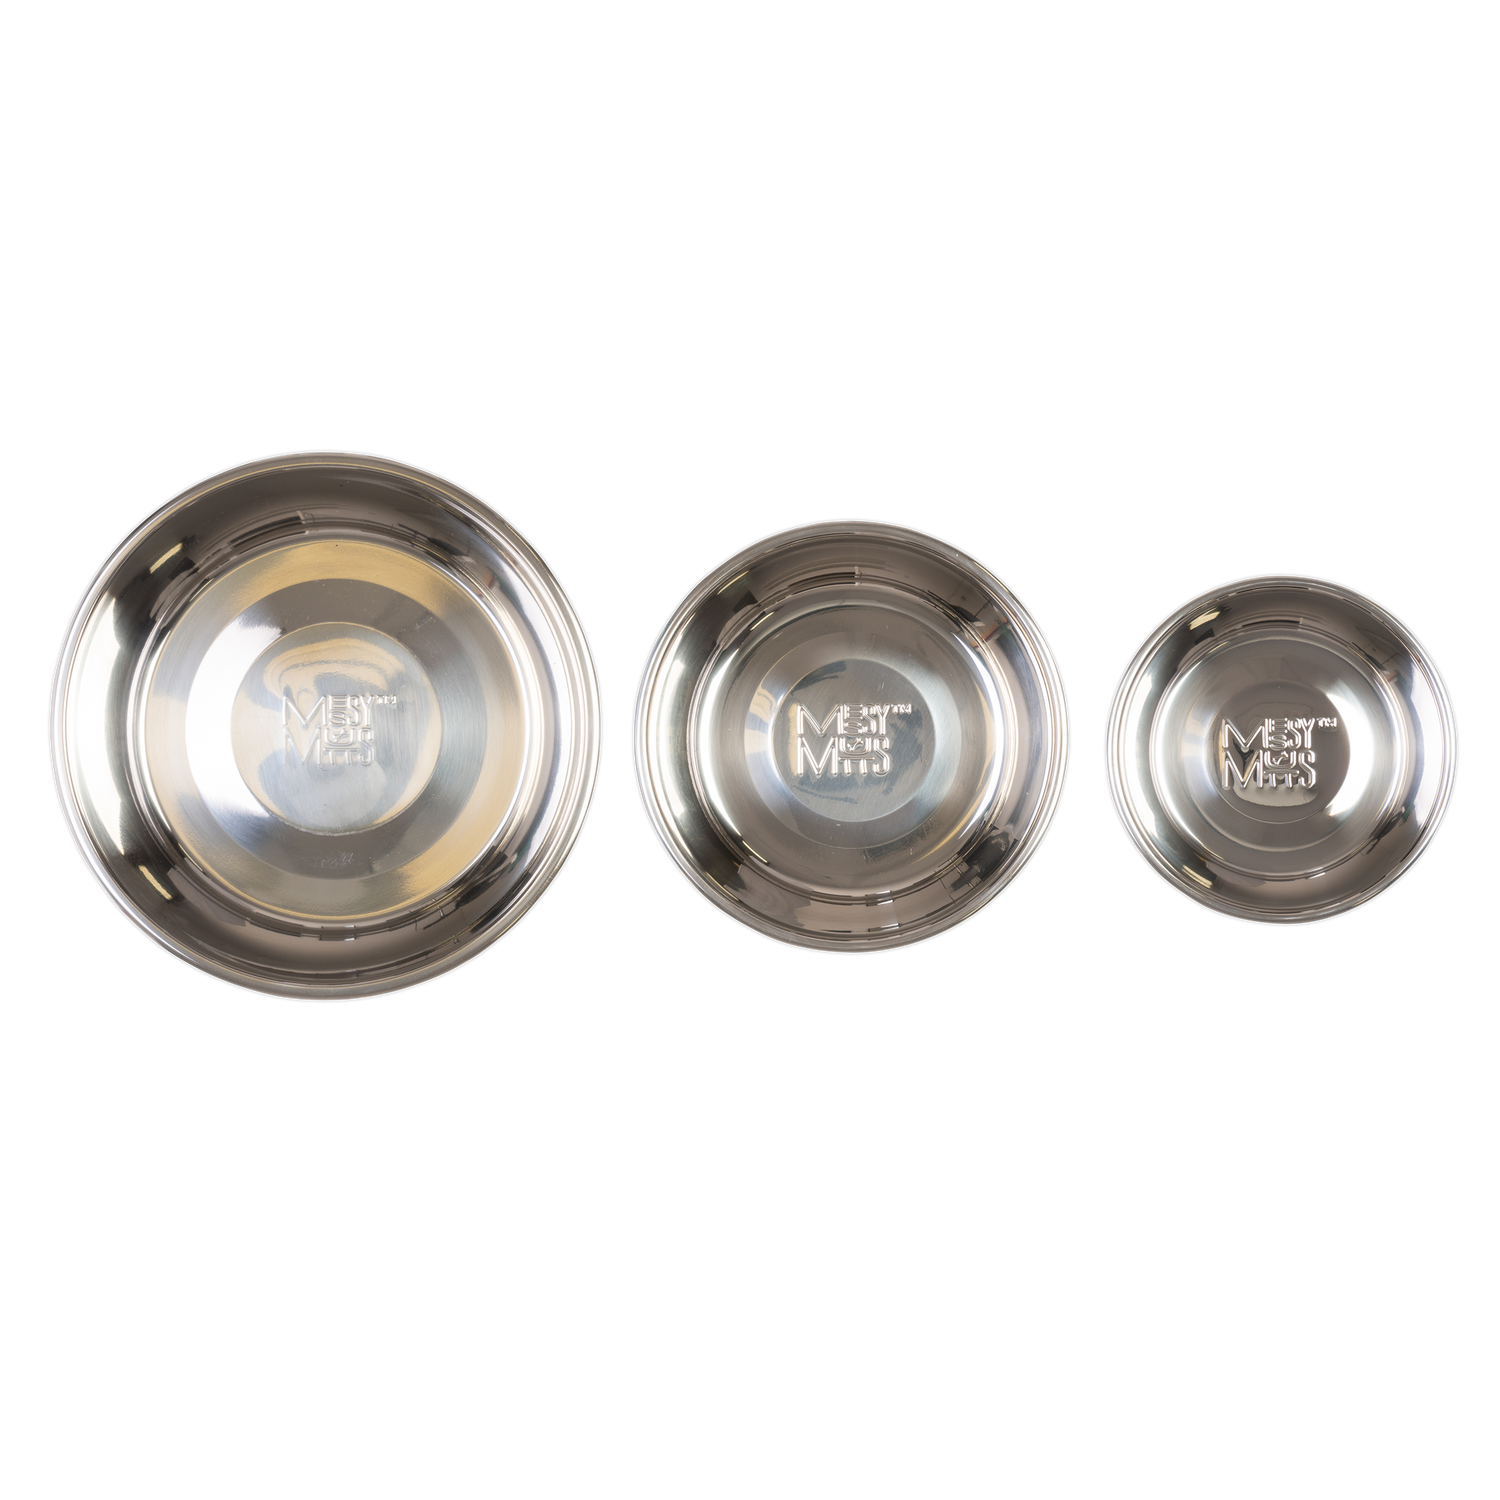 1.5 cup, 3 cup, 6 cup replacement stainless steel dog bowls.  Dishwasher safe. 